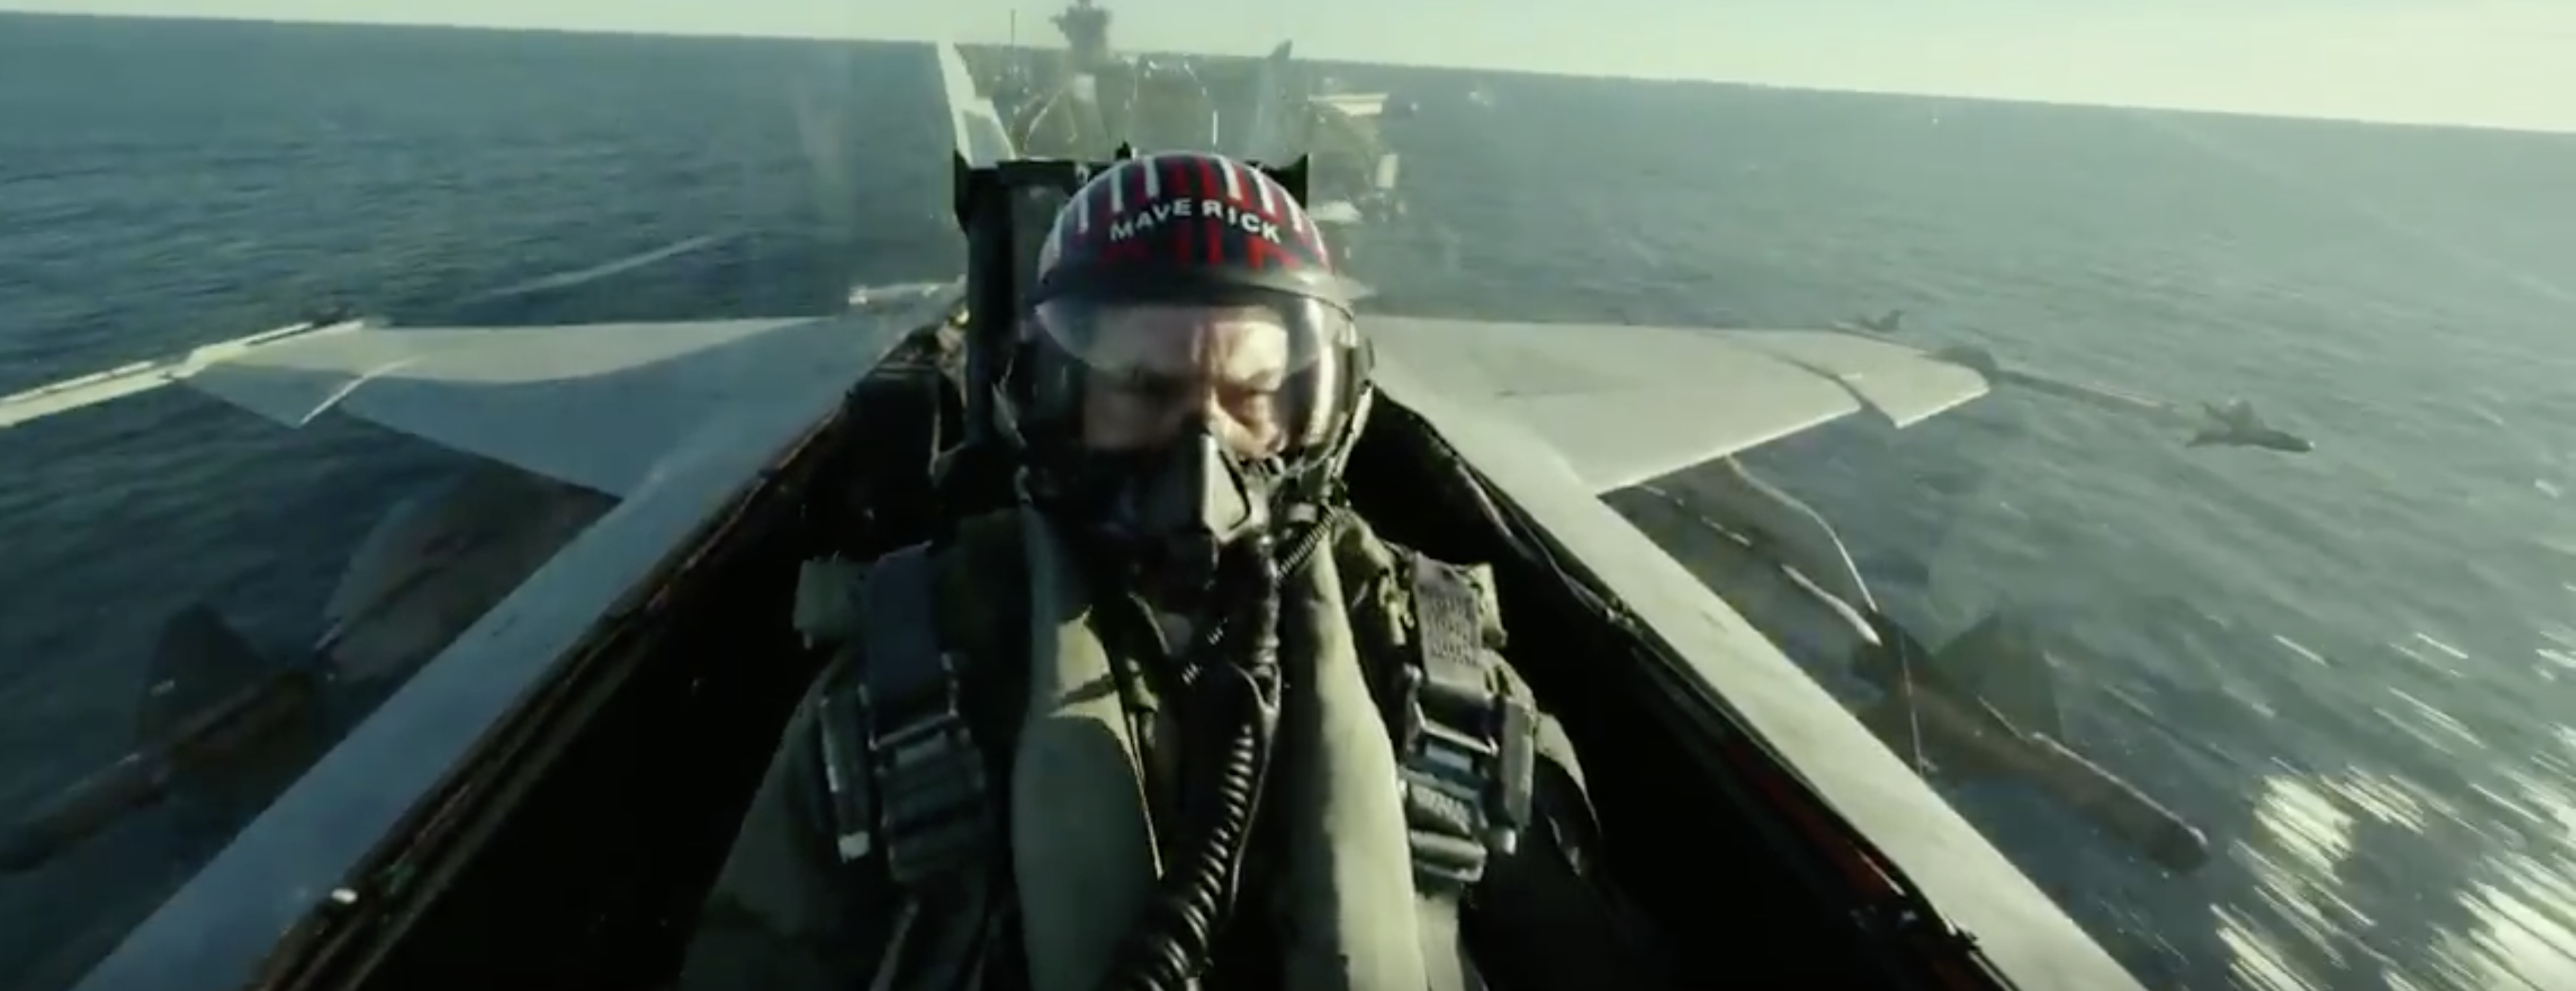 Top Gun Flies Again! Here's What We Know About the Tom Cruise Sequel